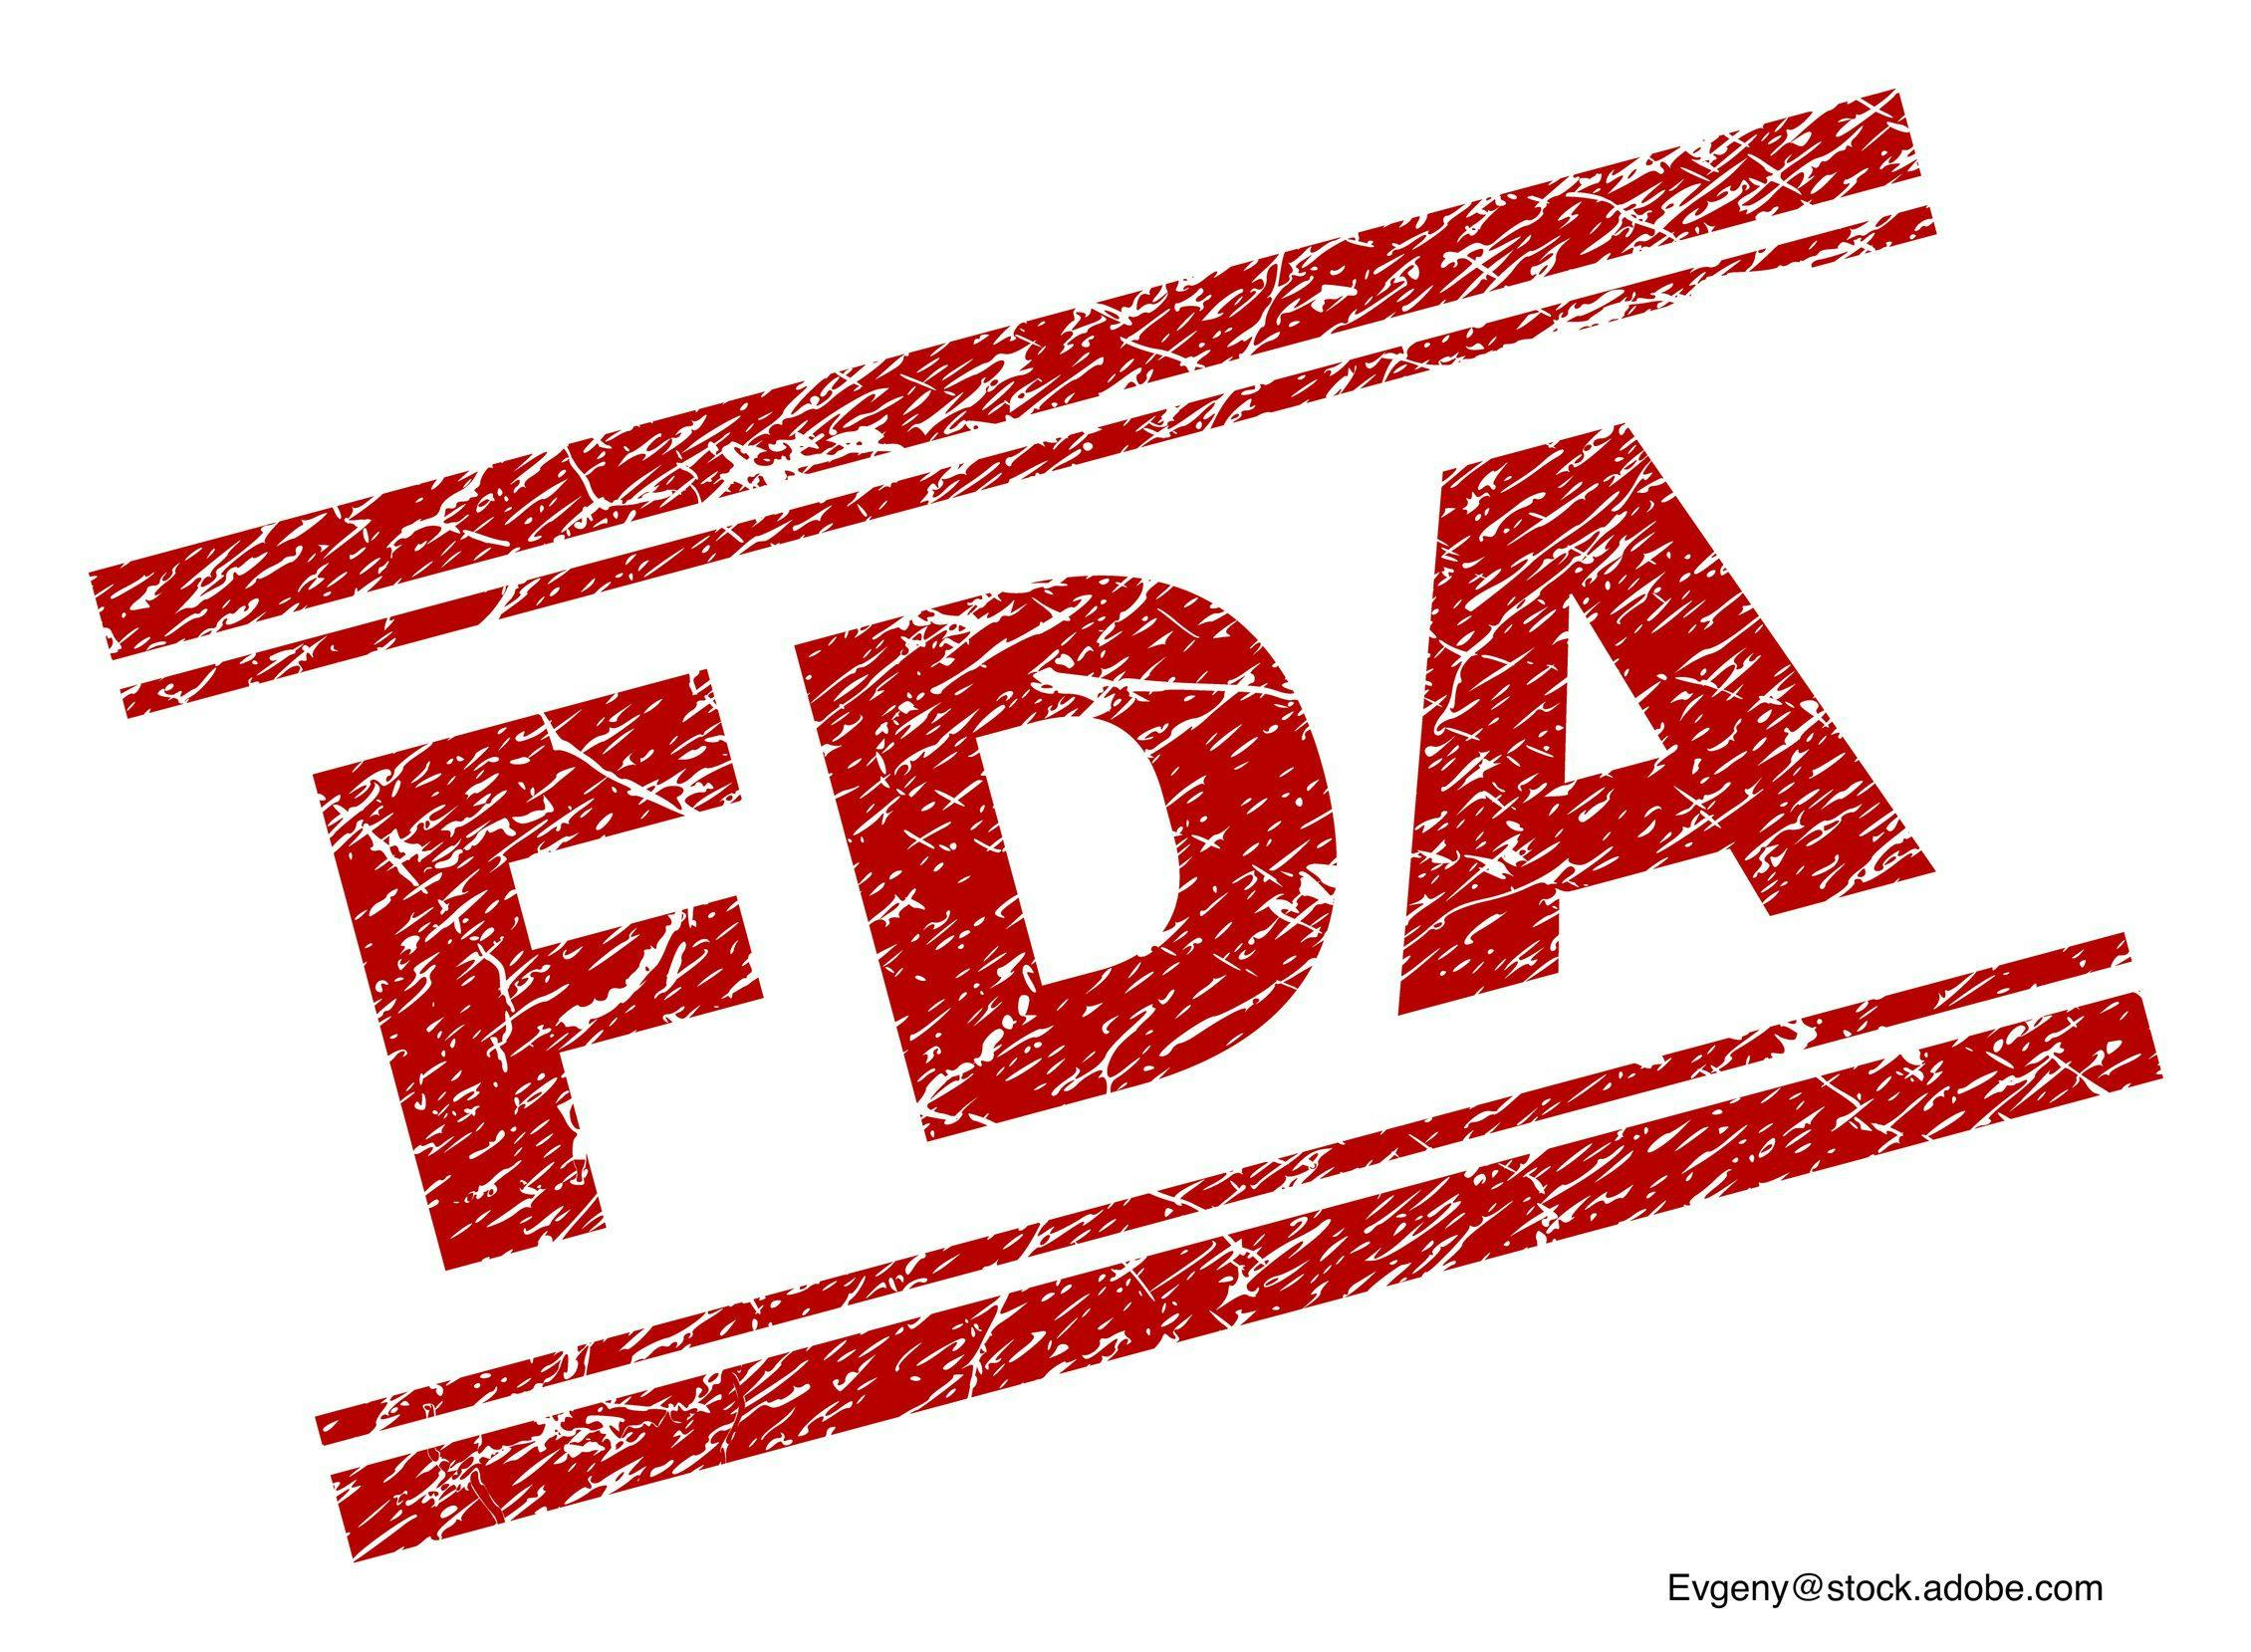 FDA approves Cosentyx for kids aged 6 and older